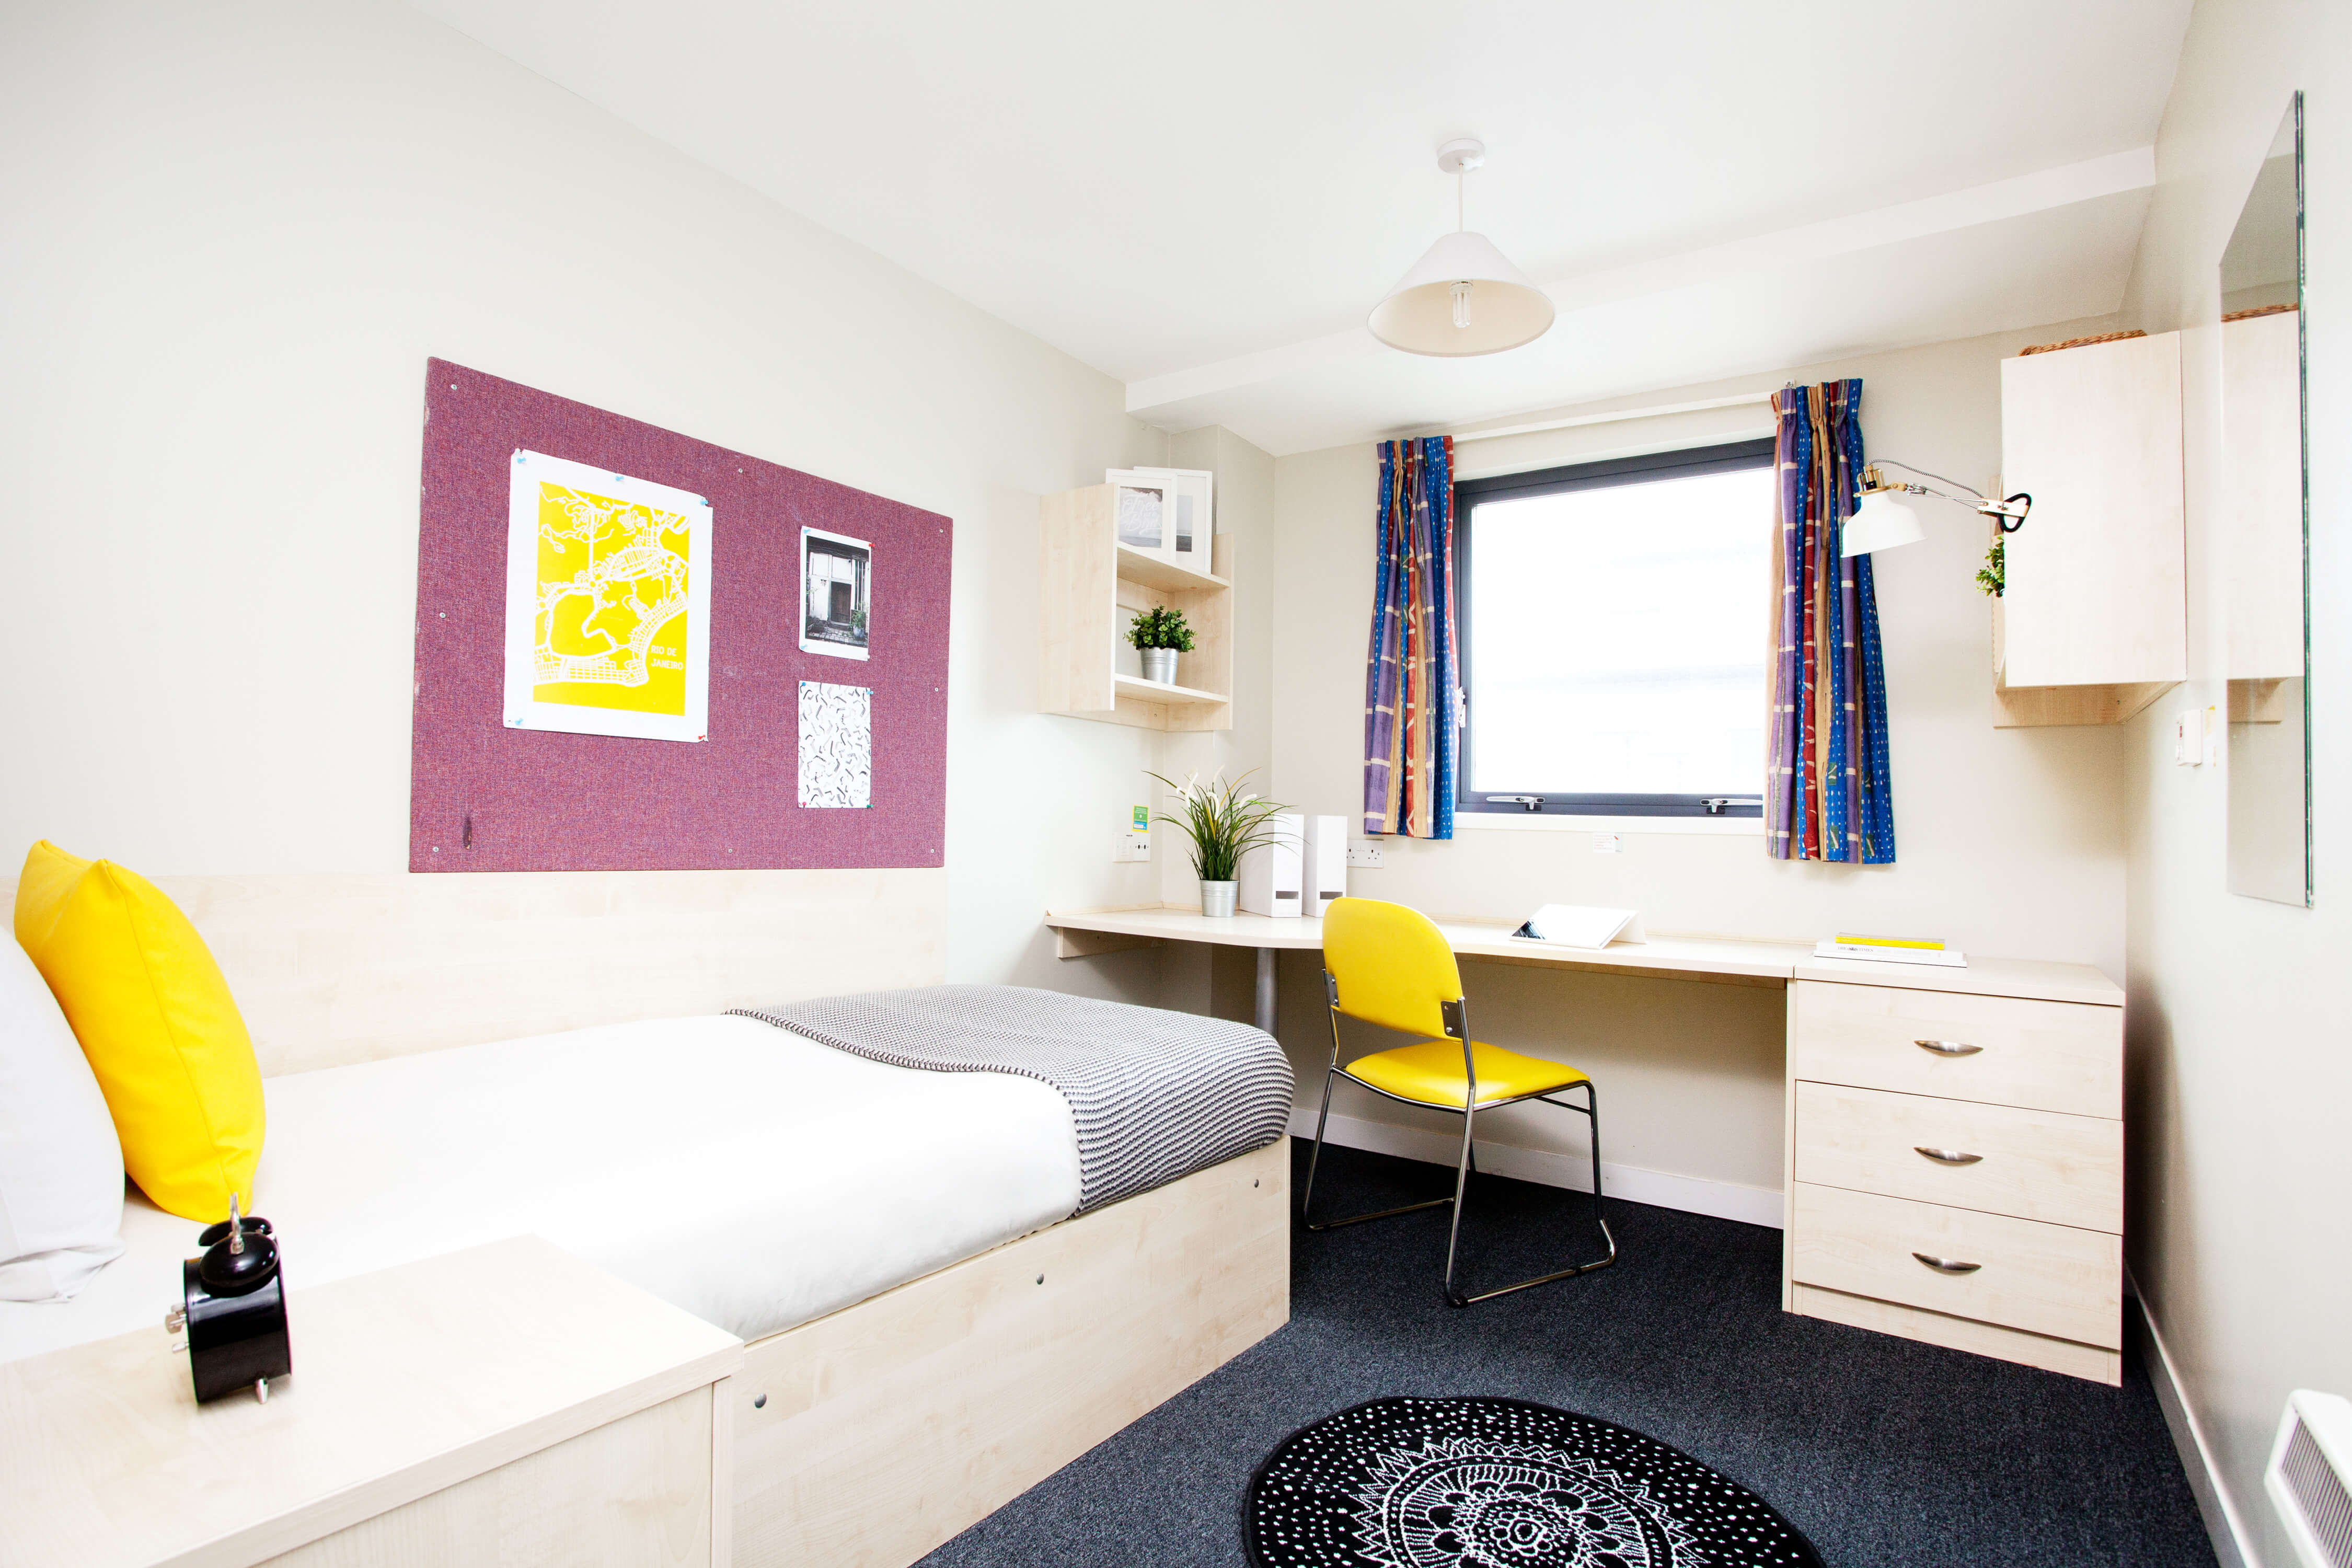 Student accommodation. The Bournemouth School of English. The spare Room. Bright School.